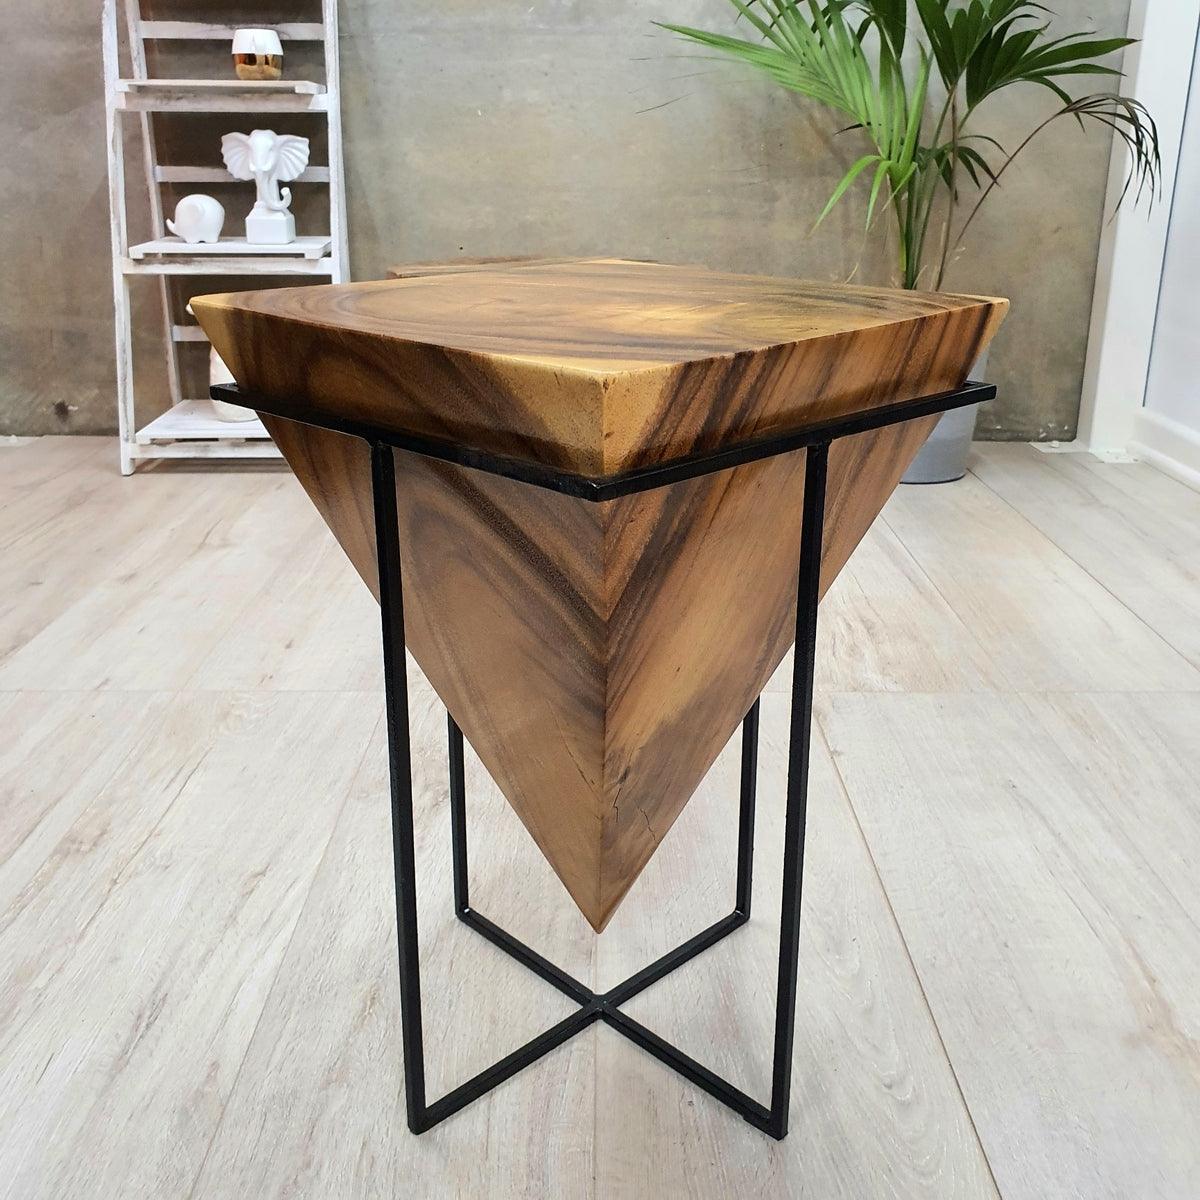 Buy Pyramid Side Table/Corner Stool/Plant Stand Raintree Wood Natural Finish discounted | Products On Sale Australia